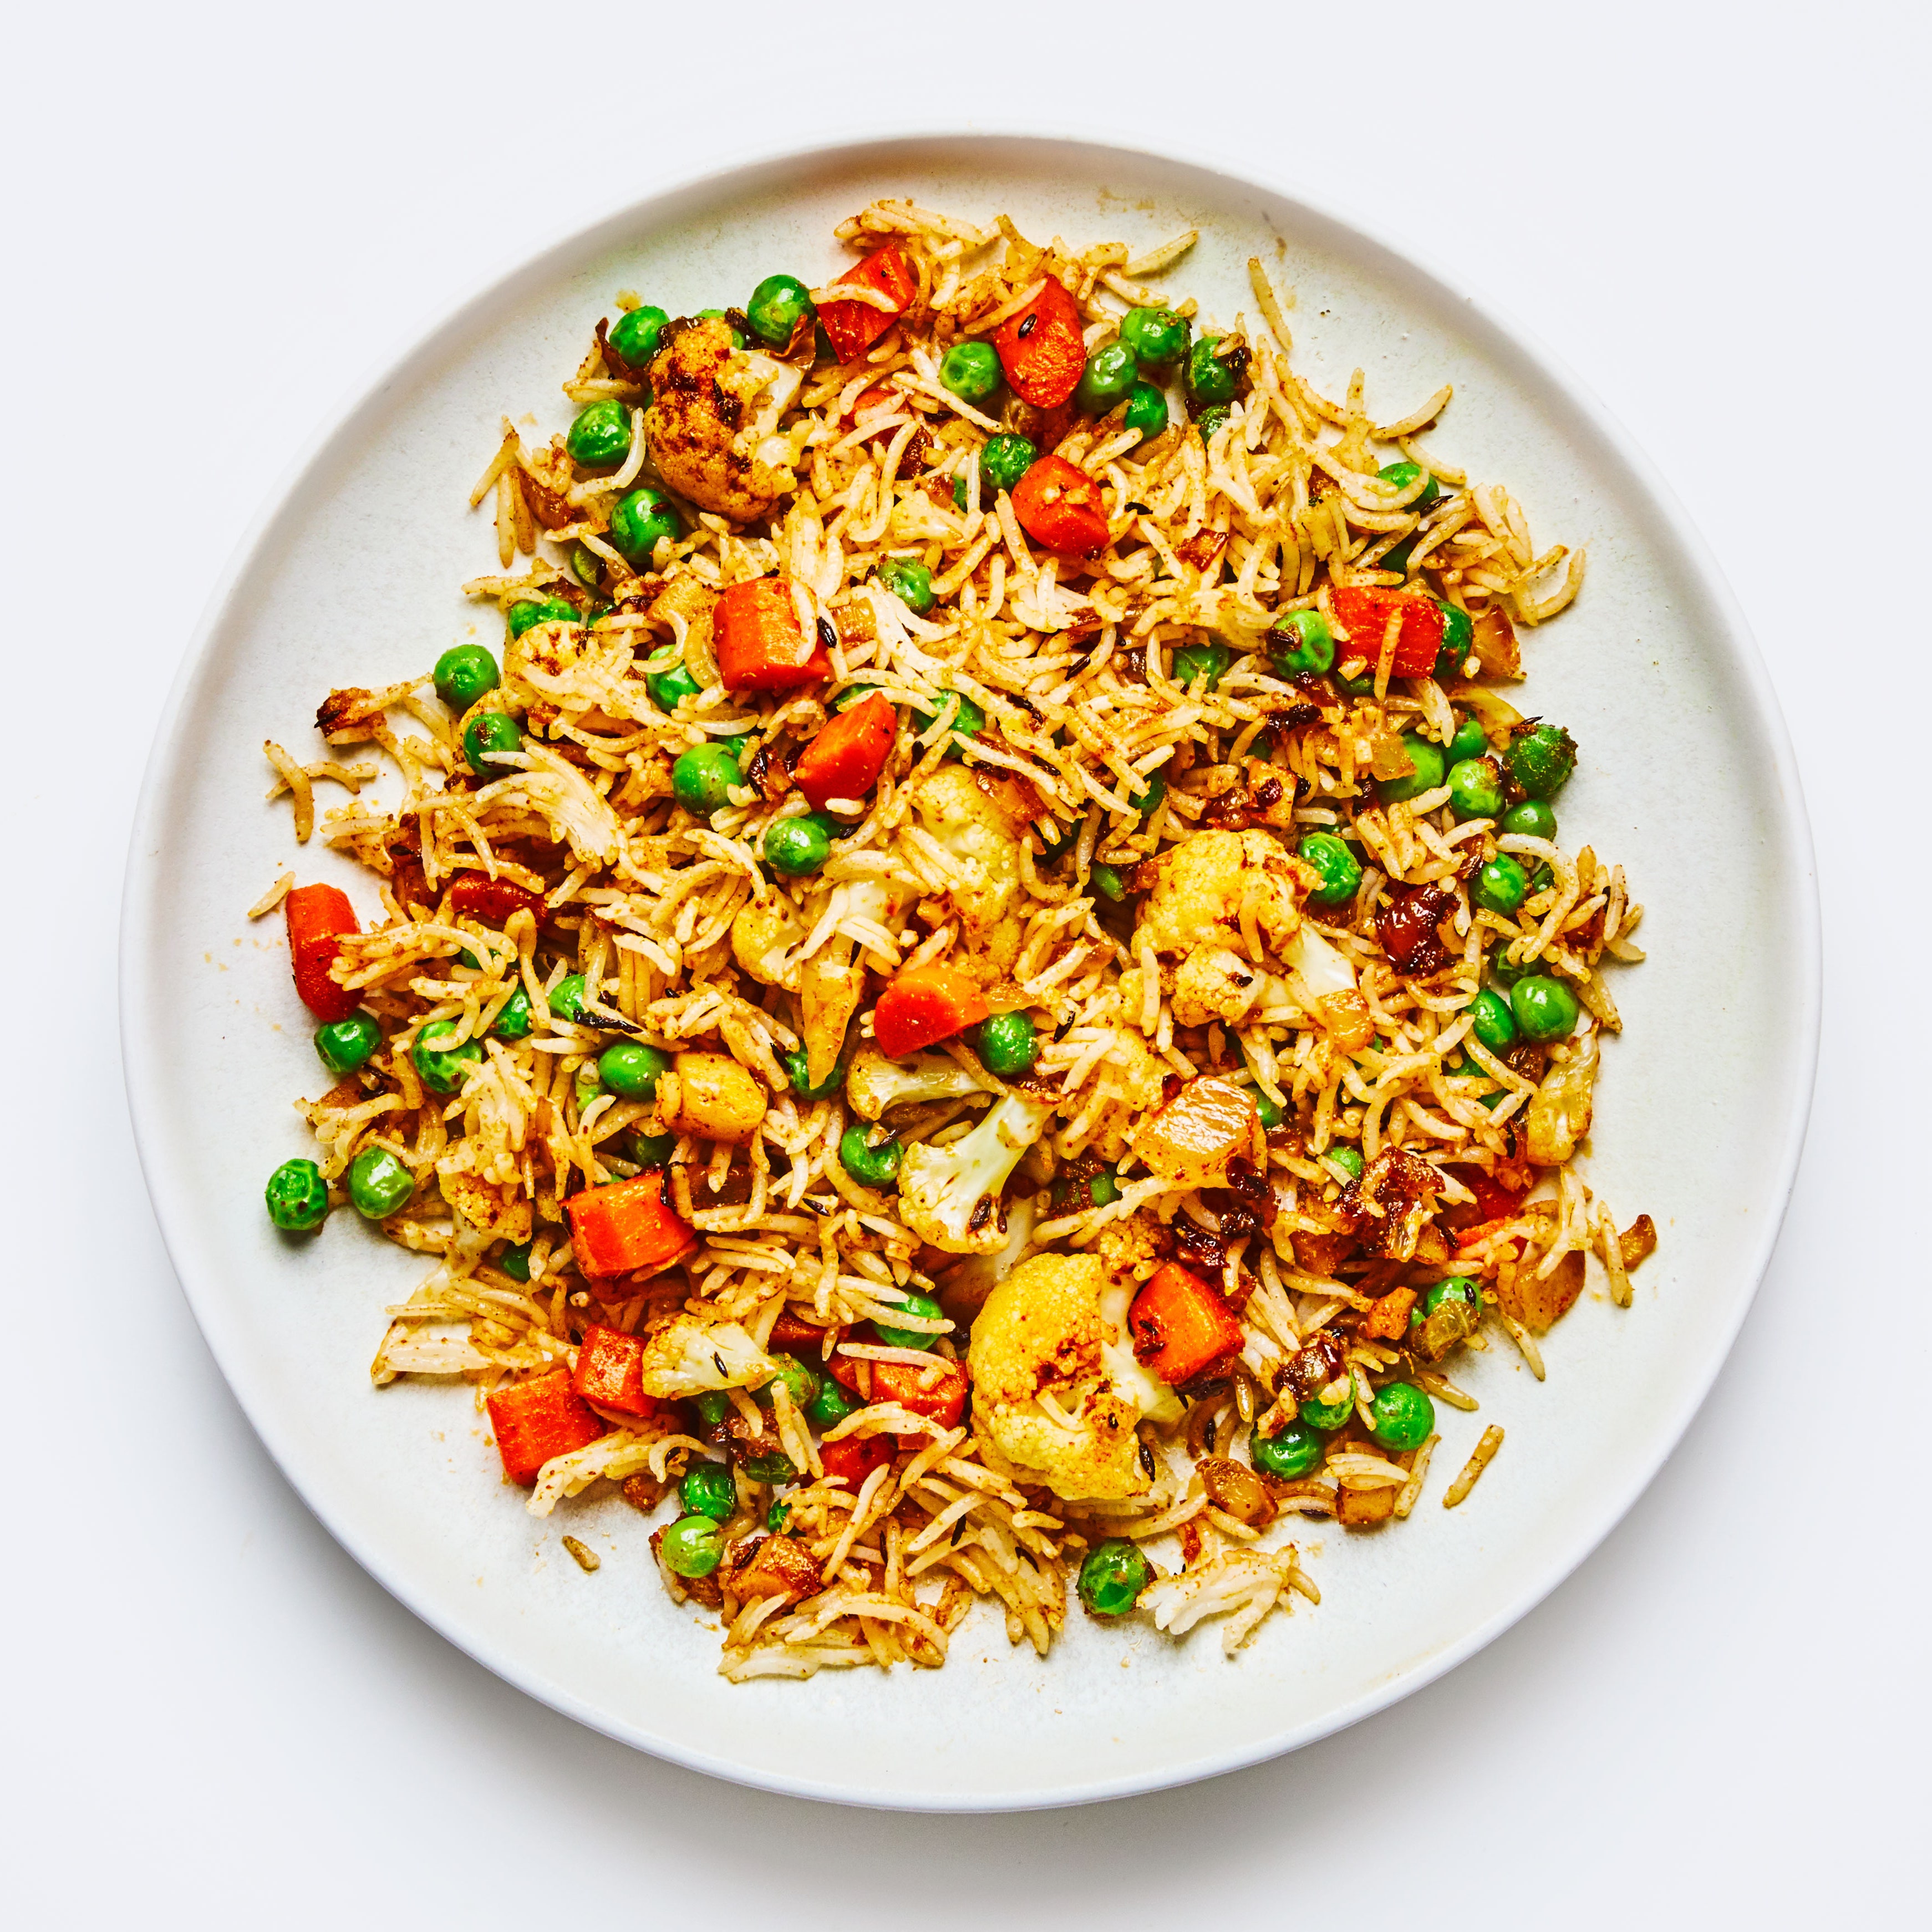 How to Make Vegetable Pulao With Whatever Is Lingering in Your Fridge